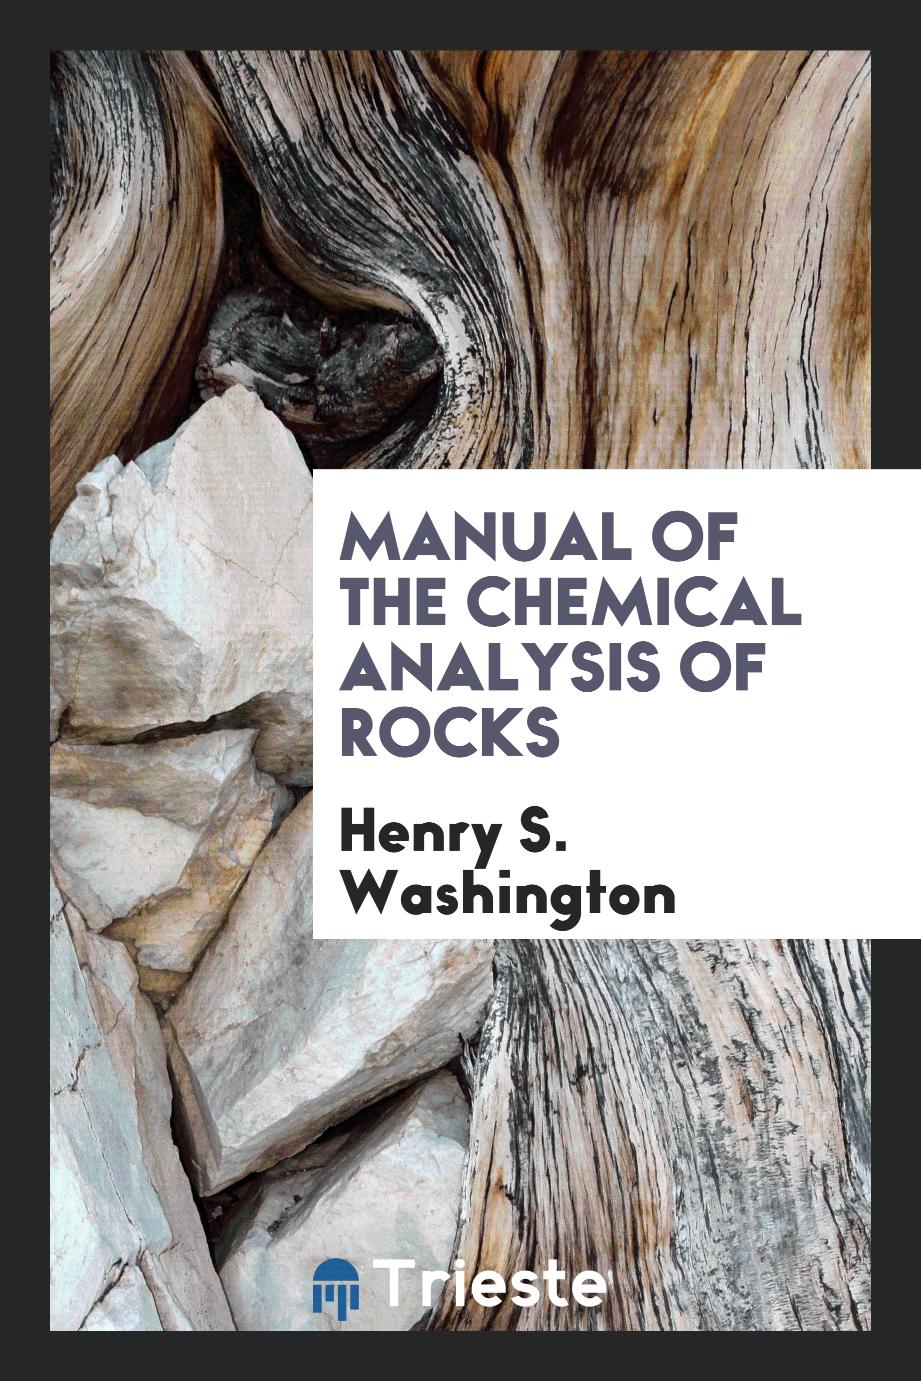 Manual of the chemical analysis of rocks